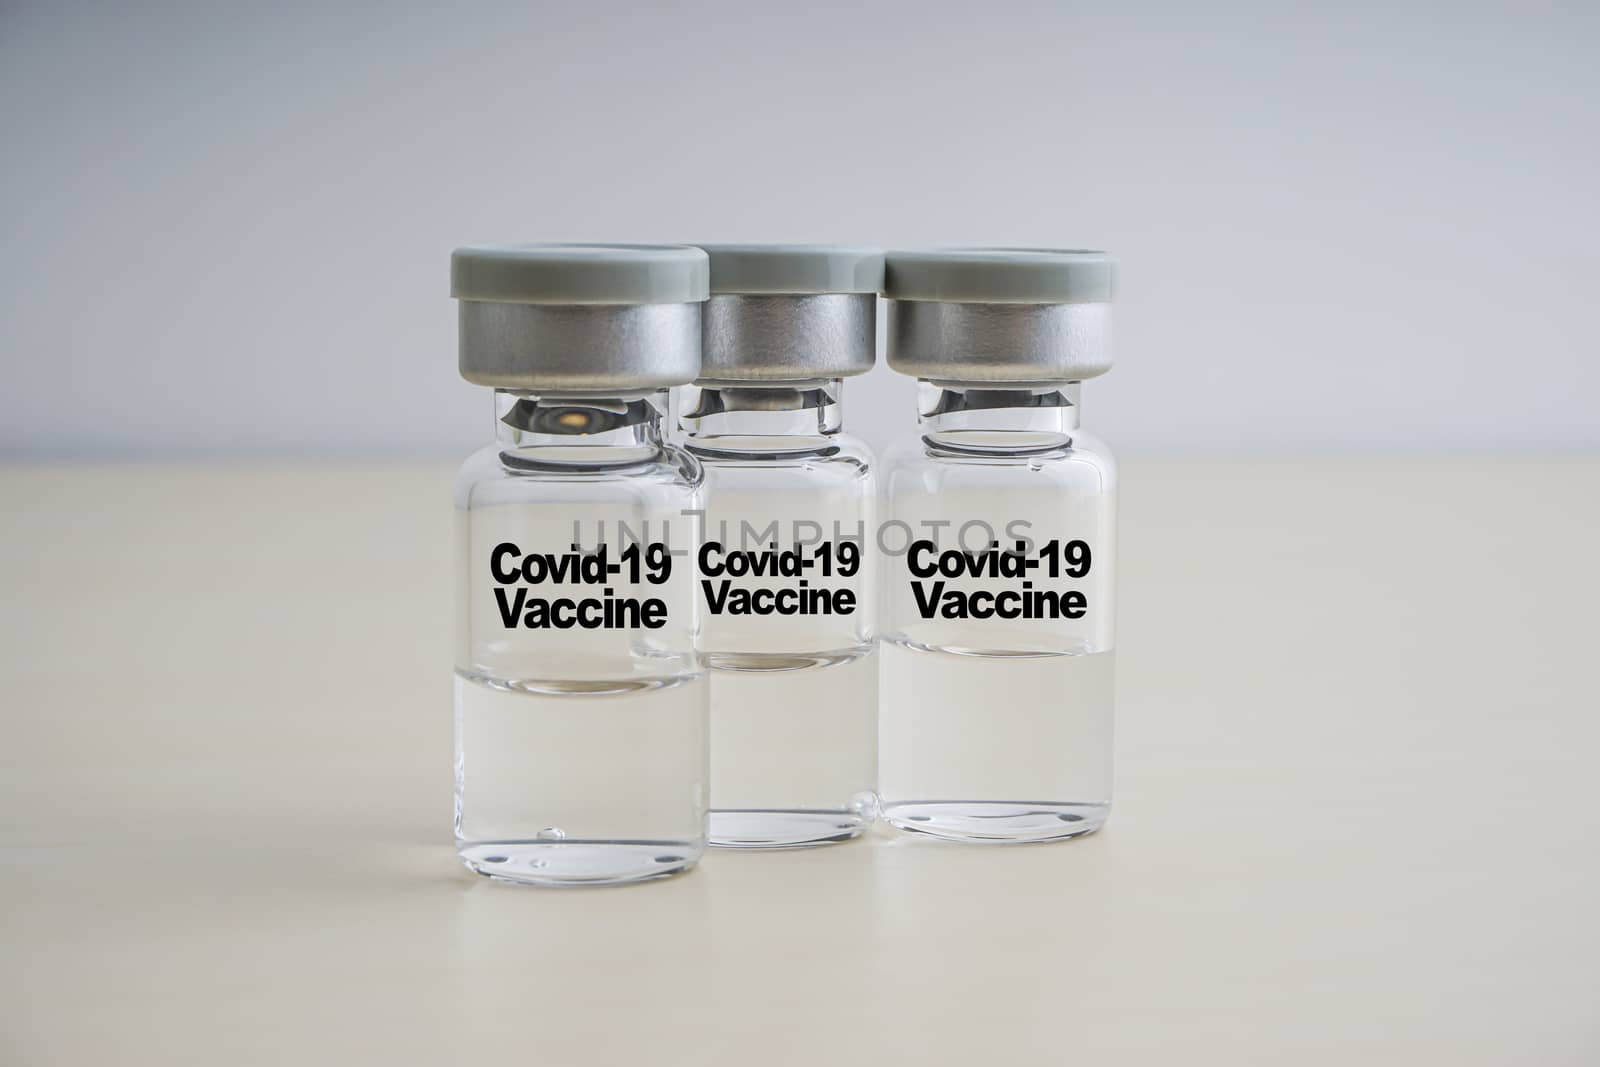 COVID-19 VACCINE text with vials on wooden background by silverwings